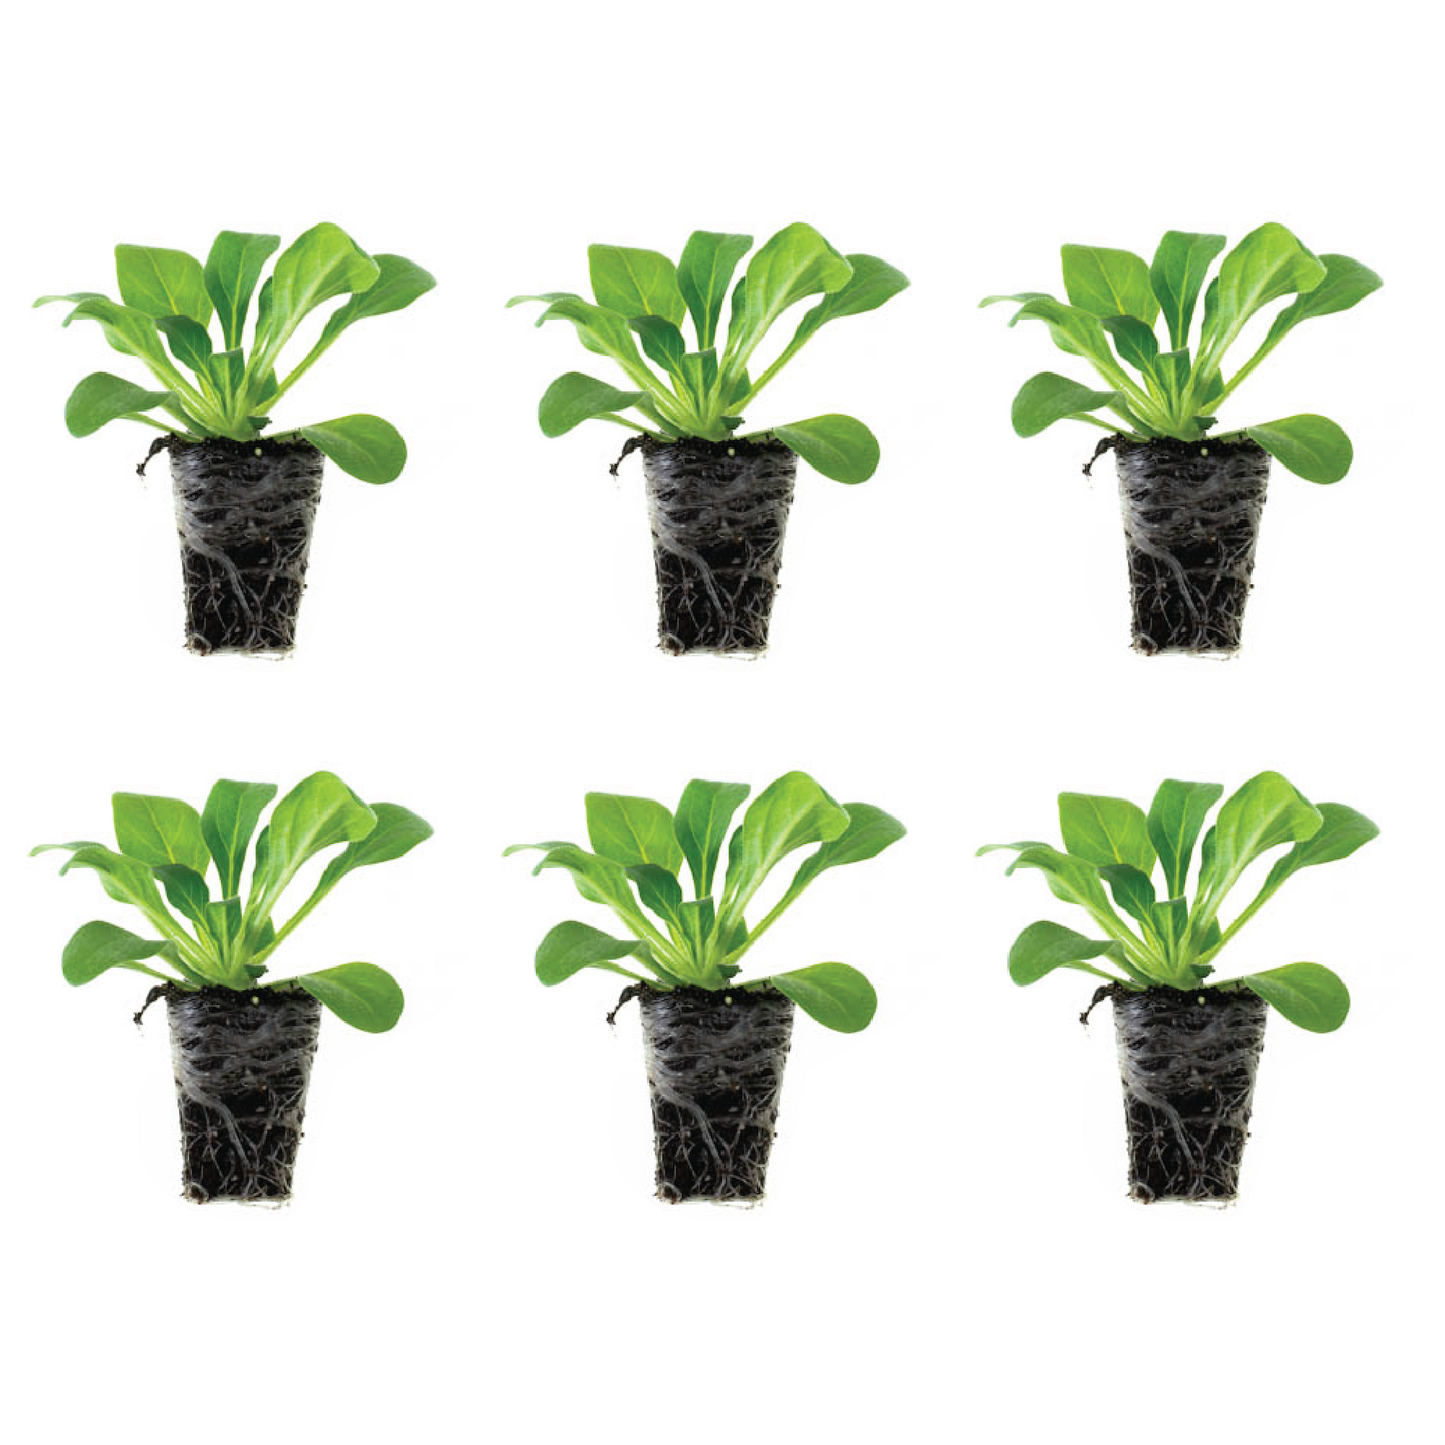 Petunia E3 Easy Wave™ Blue Sky Spreading Plantlings Live Baby Plants 1-3in., 6-Pack